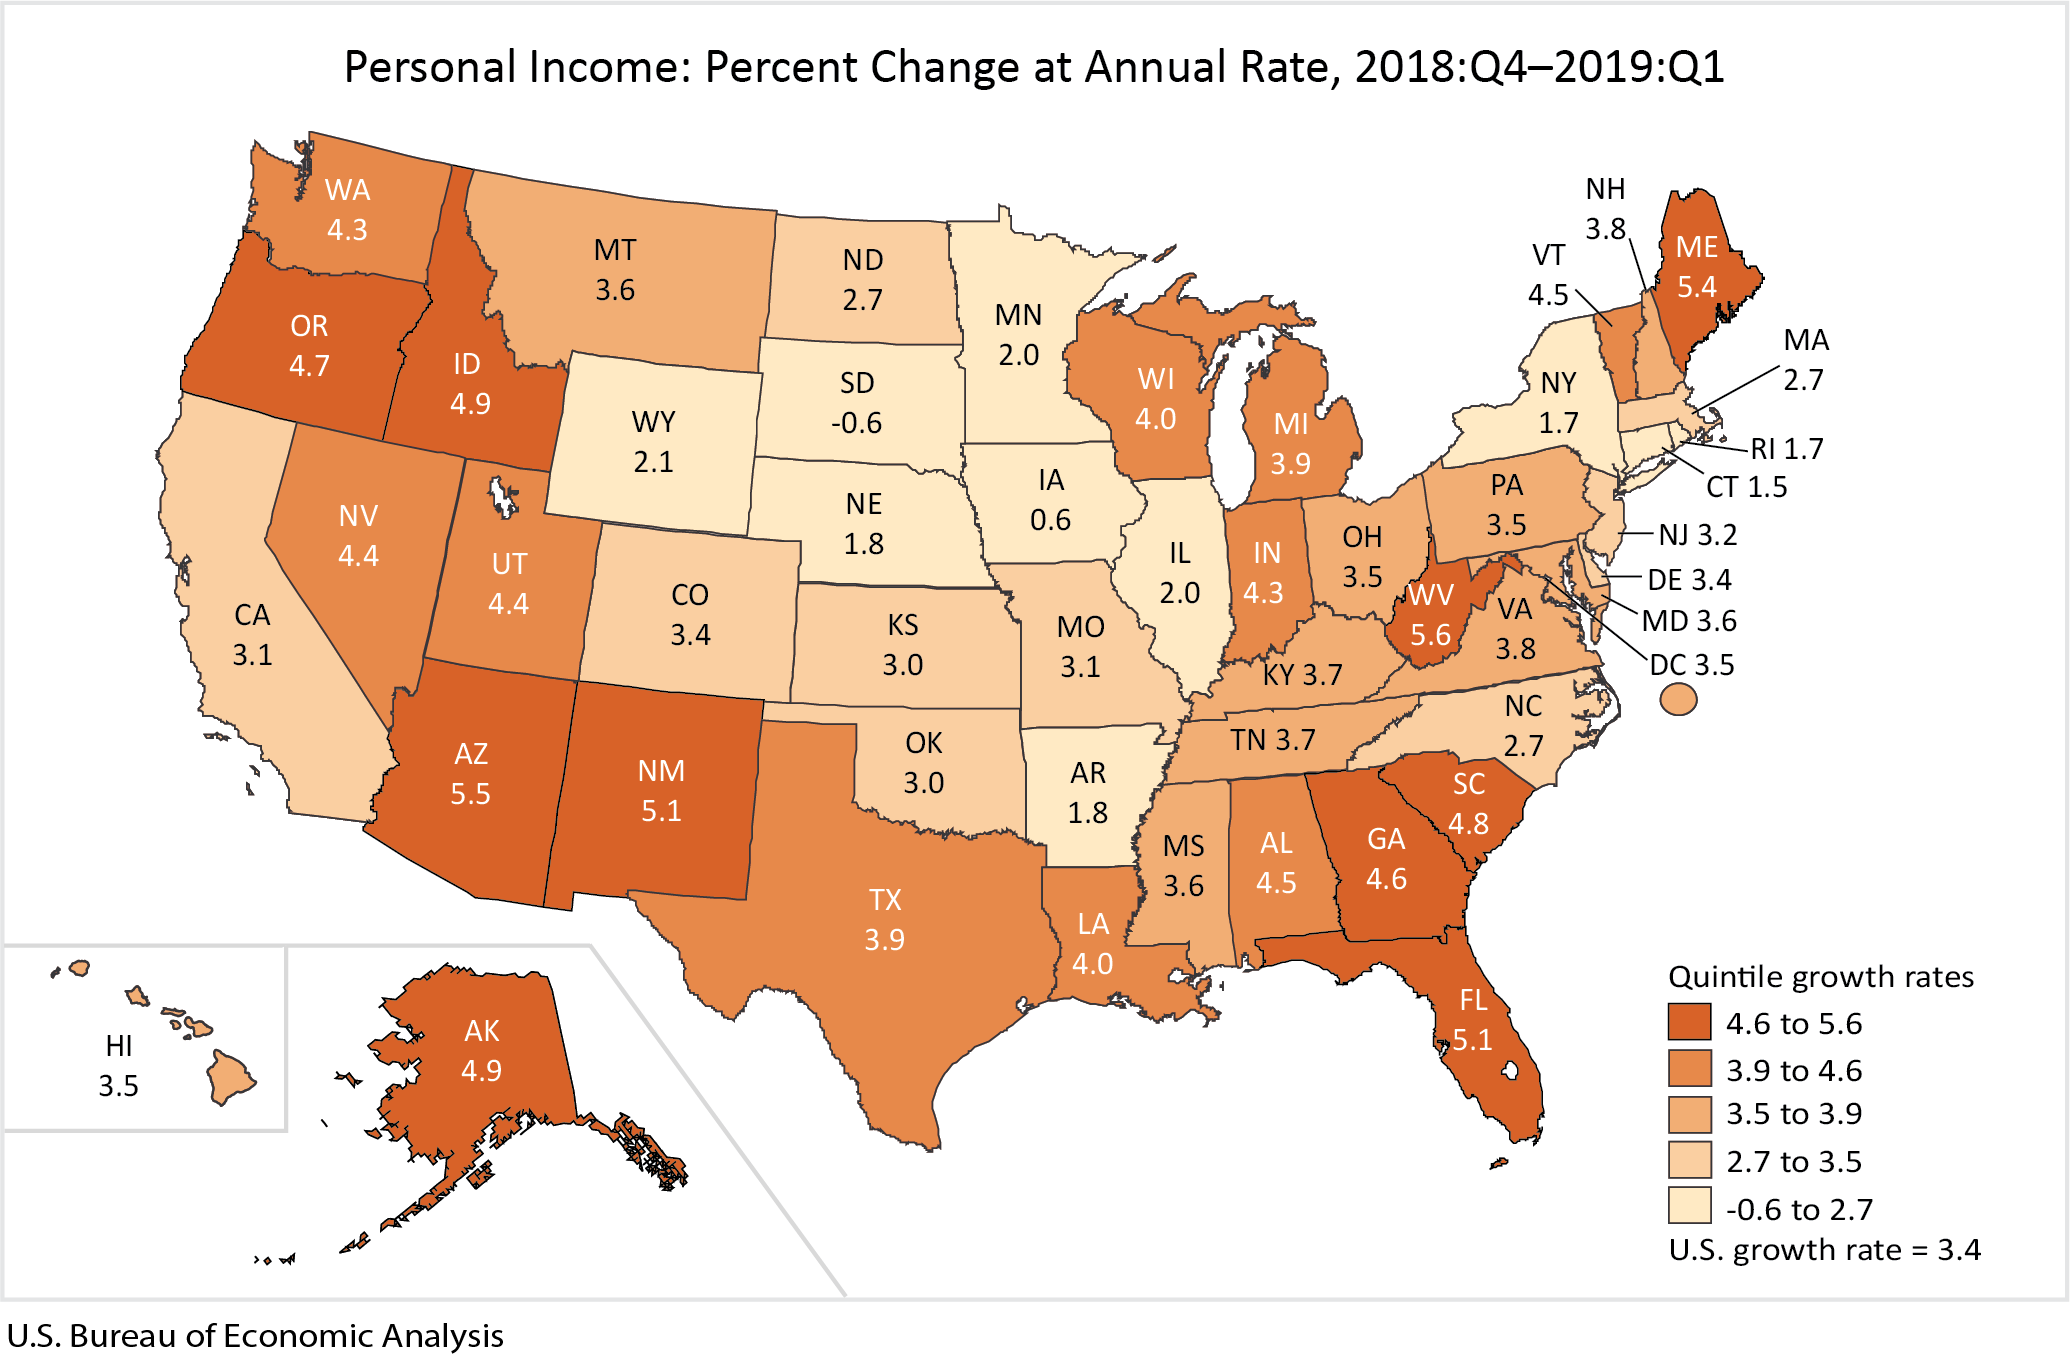 Personal Income: Percent Change at Annual Rate, 2018:Q4-2019:Q1